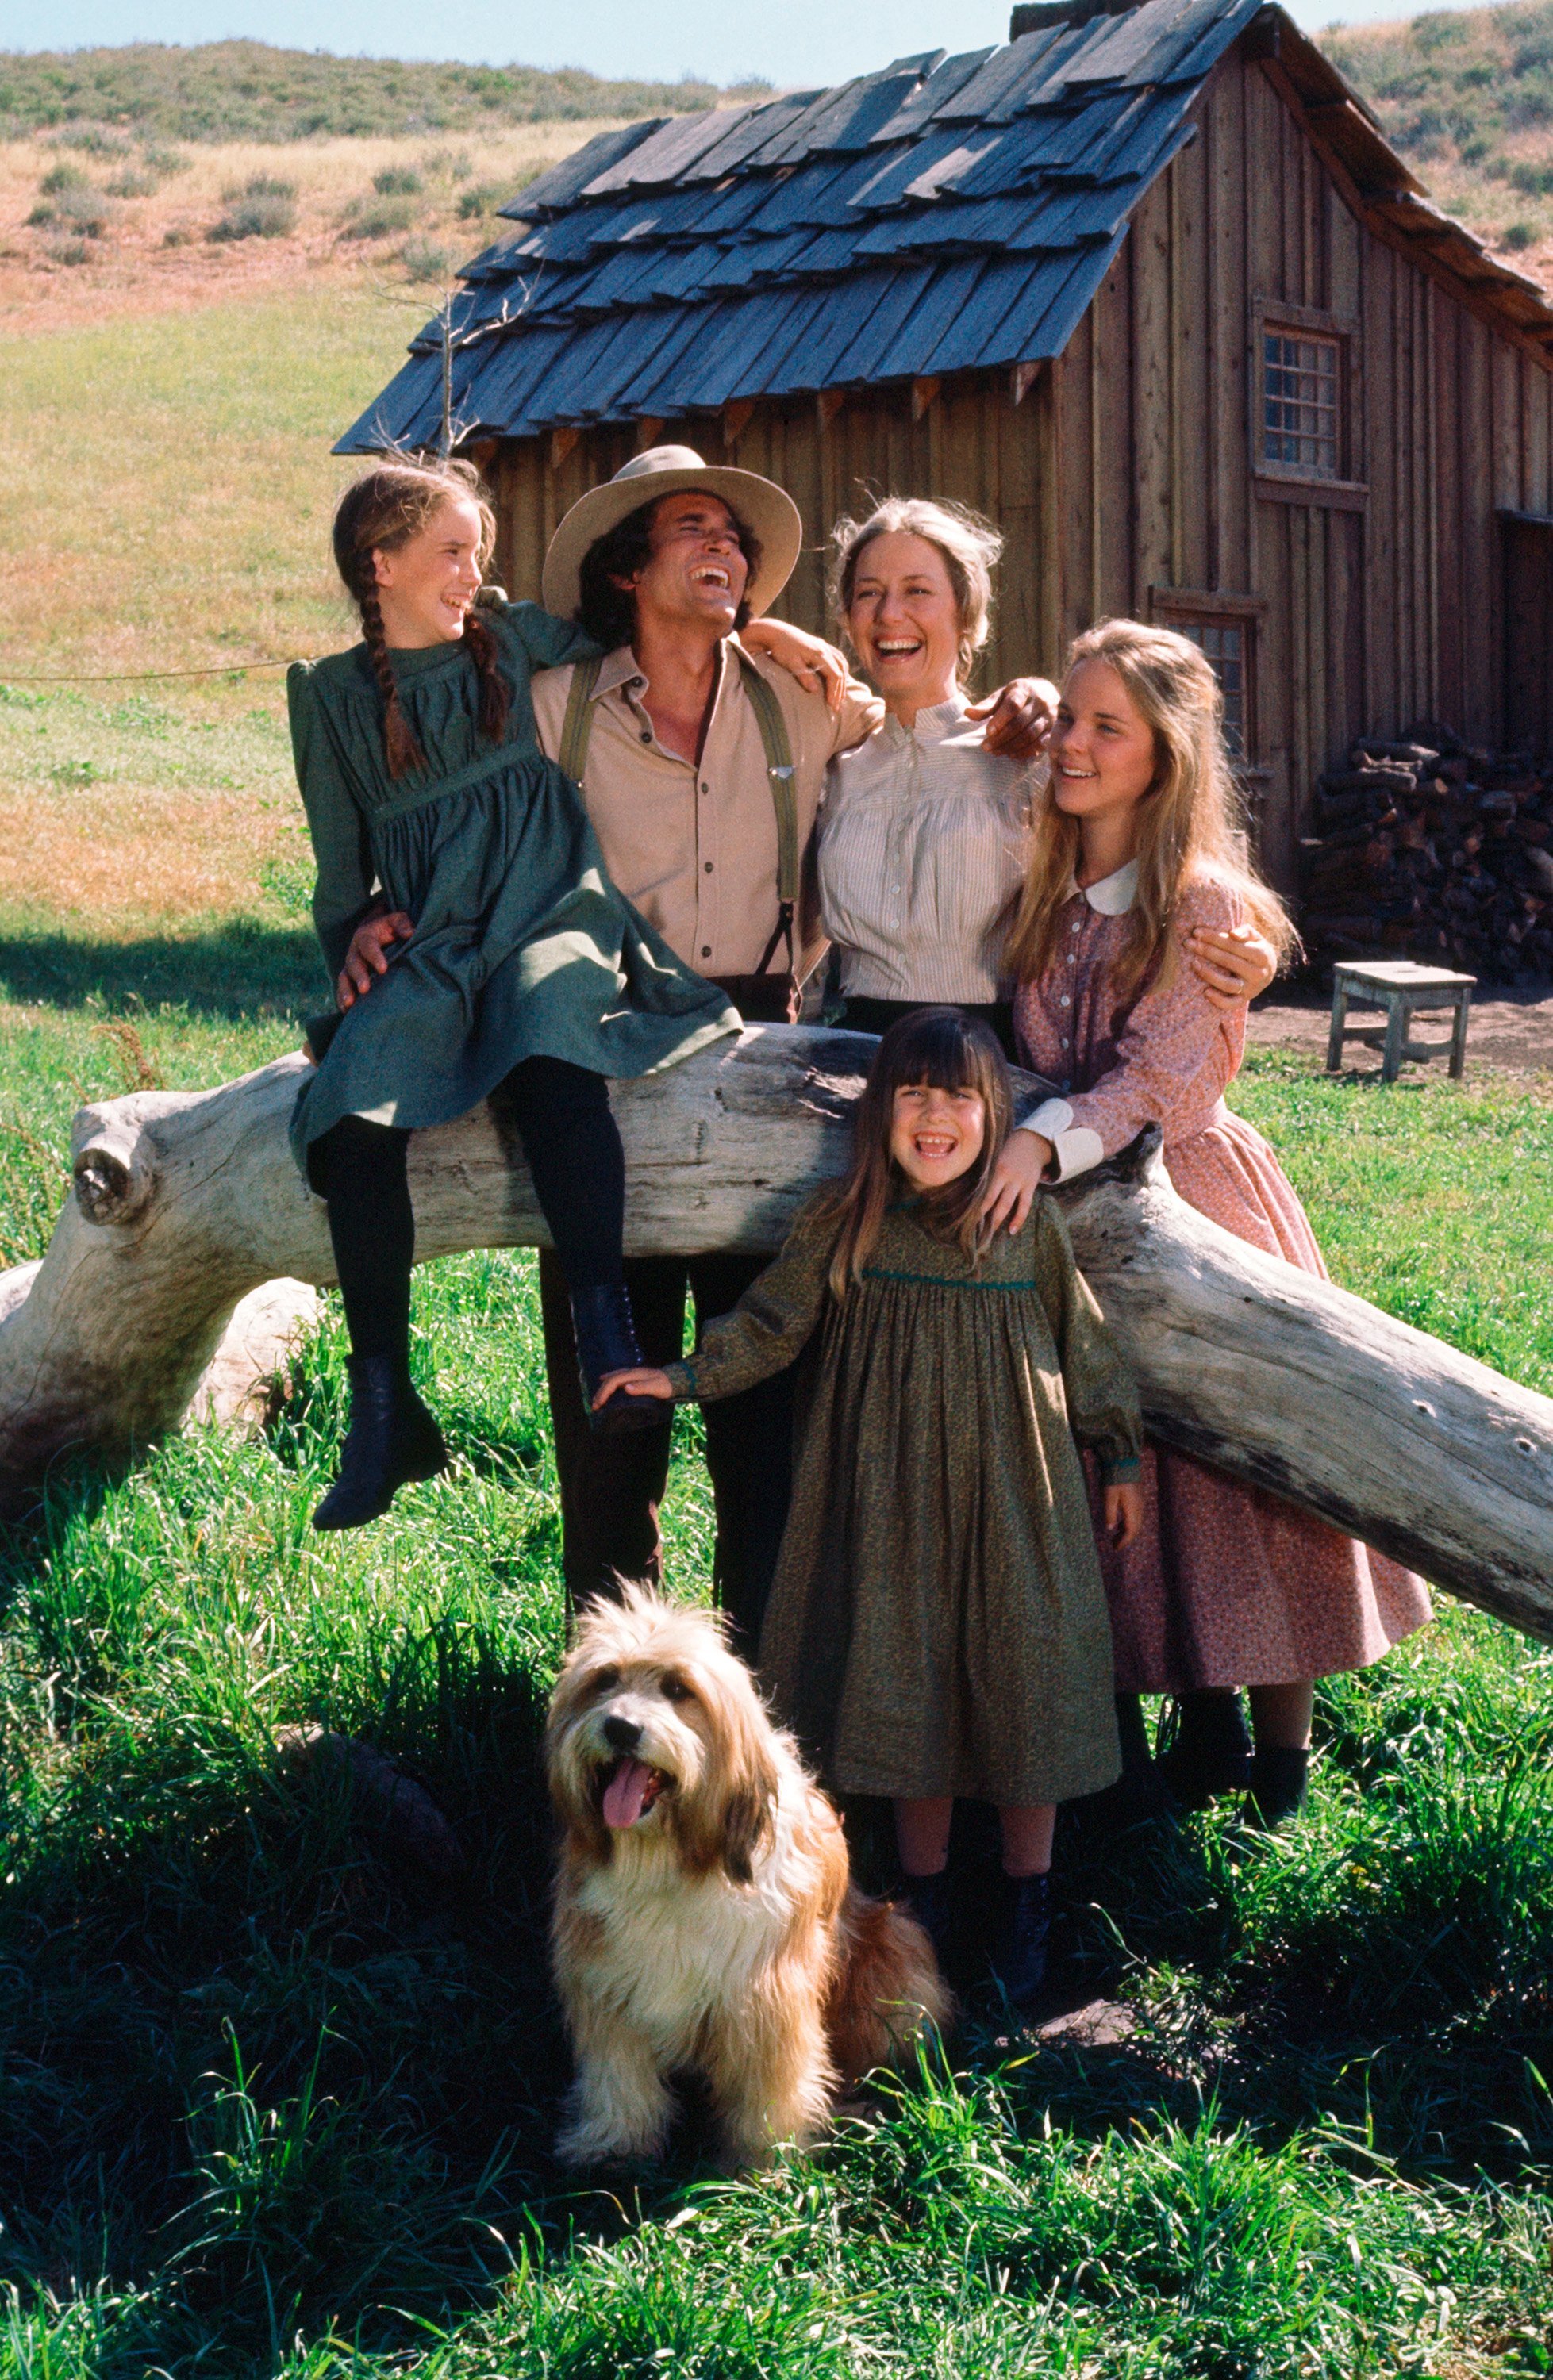 The cast of 'Little House on the Prairie'